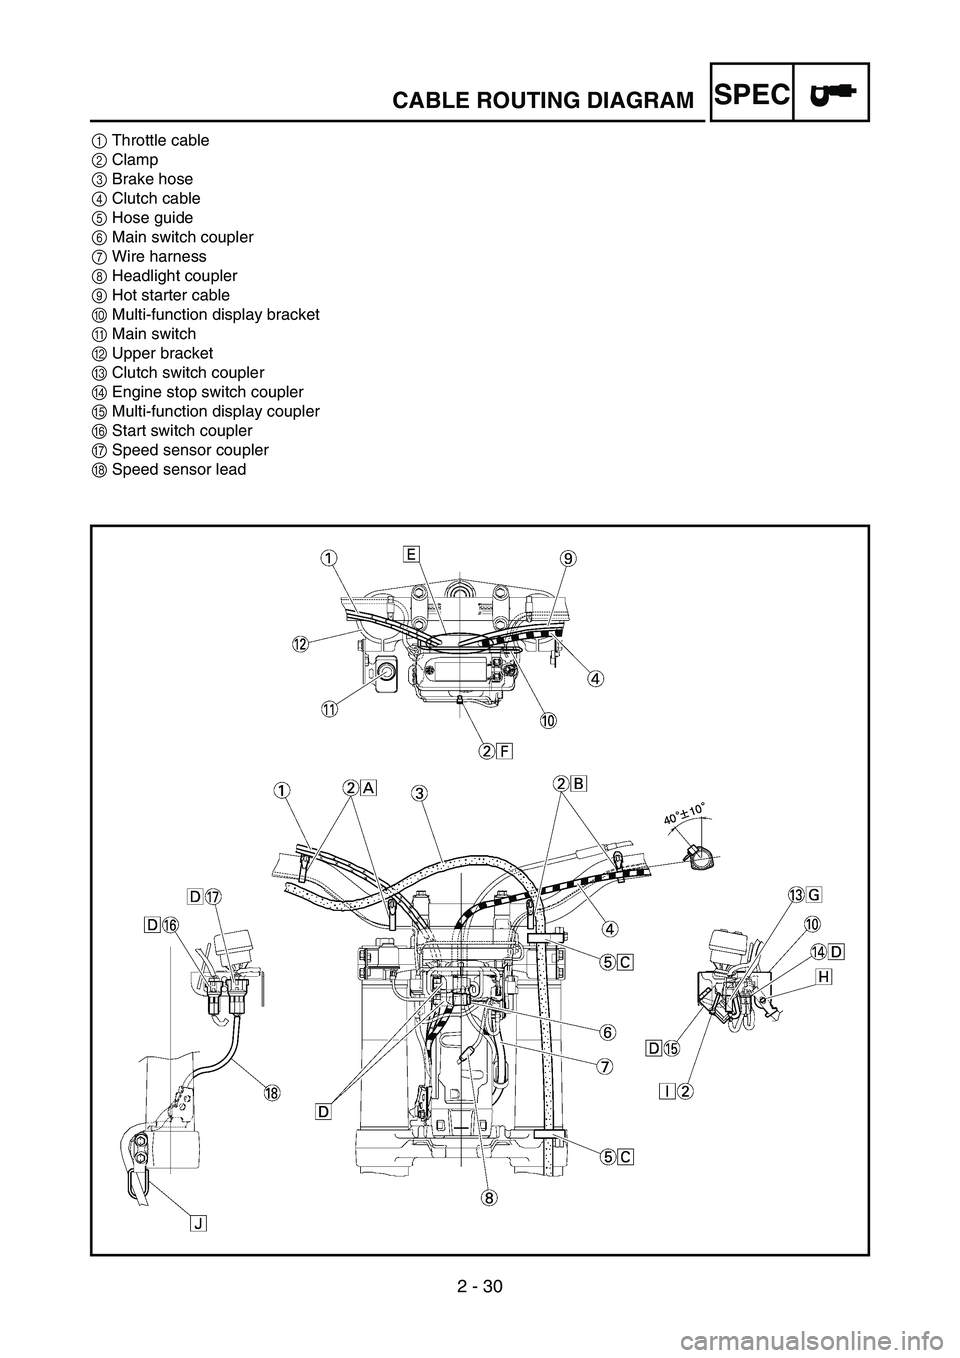 YAMAHA WR 450F 2007  Owners Manual 2 - 30
SPECCABLE ROUTING DIAGRAM
1Throttle cable
2Clamp
3Brake hose
4Clutch cable
5Hose guide
6Main switch coupler
7Wire harness
8Headlight coupler
9Hot starter cable
0Multi-function display bracket
A